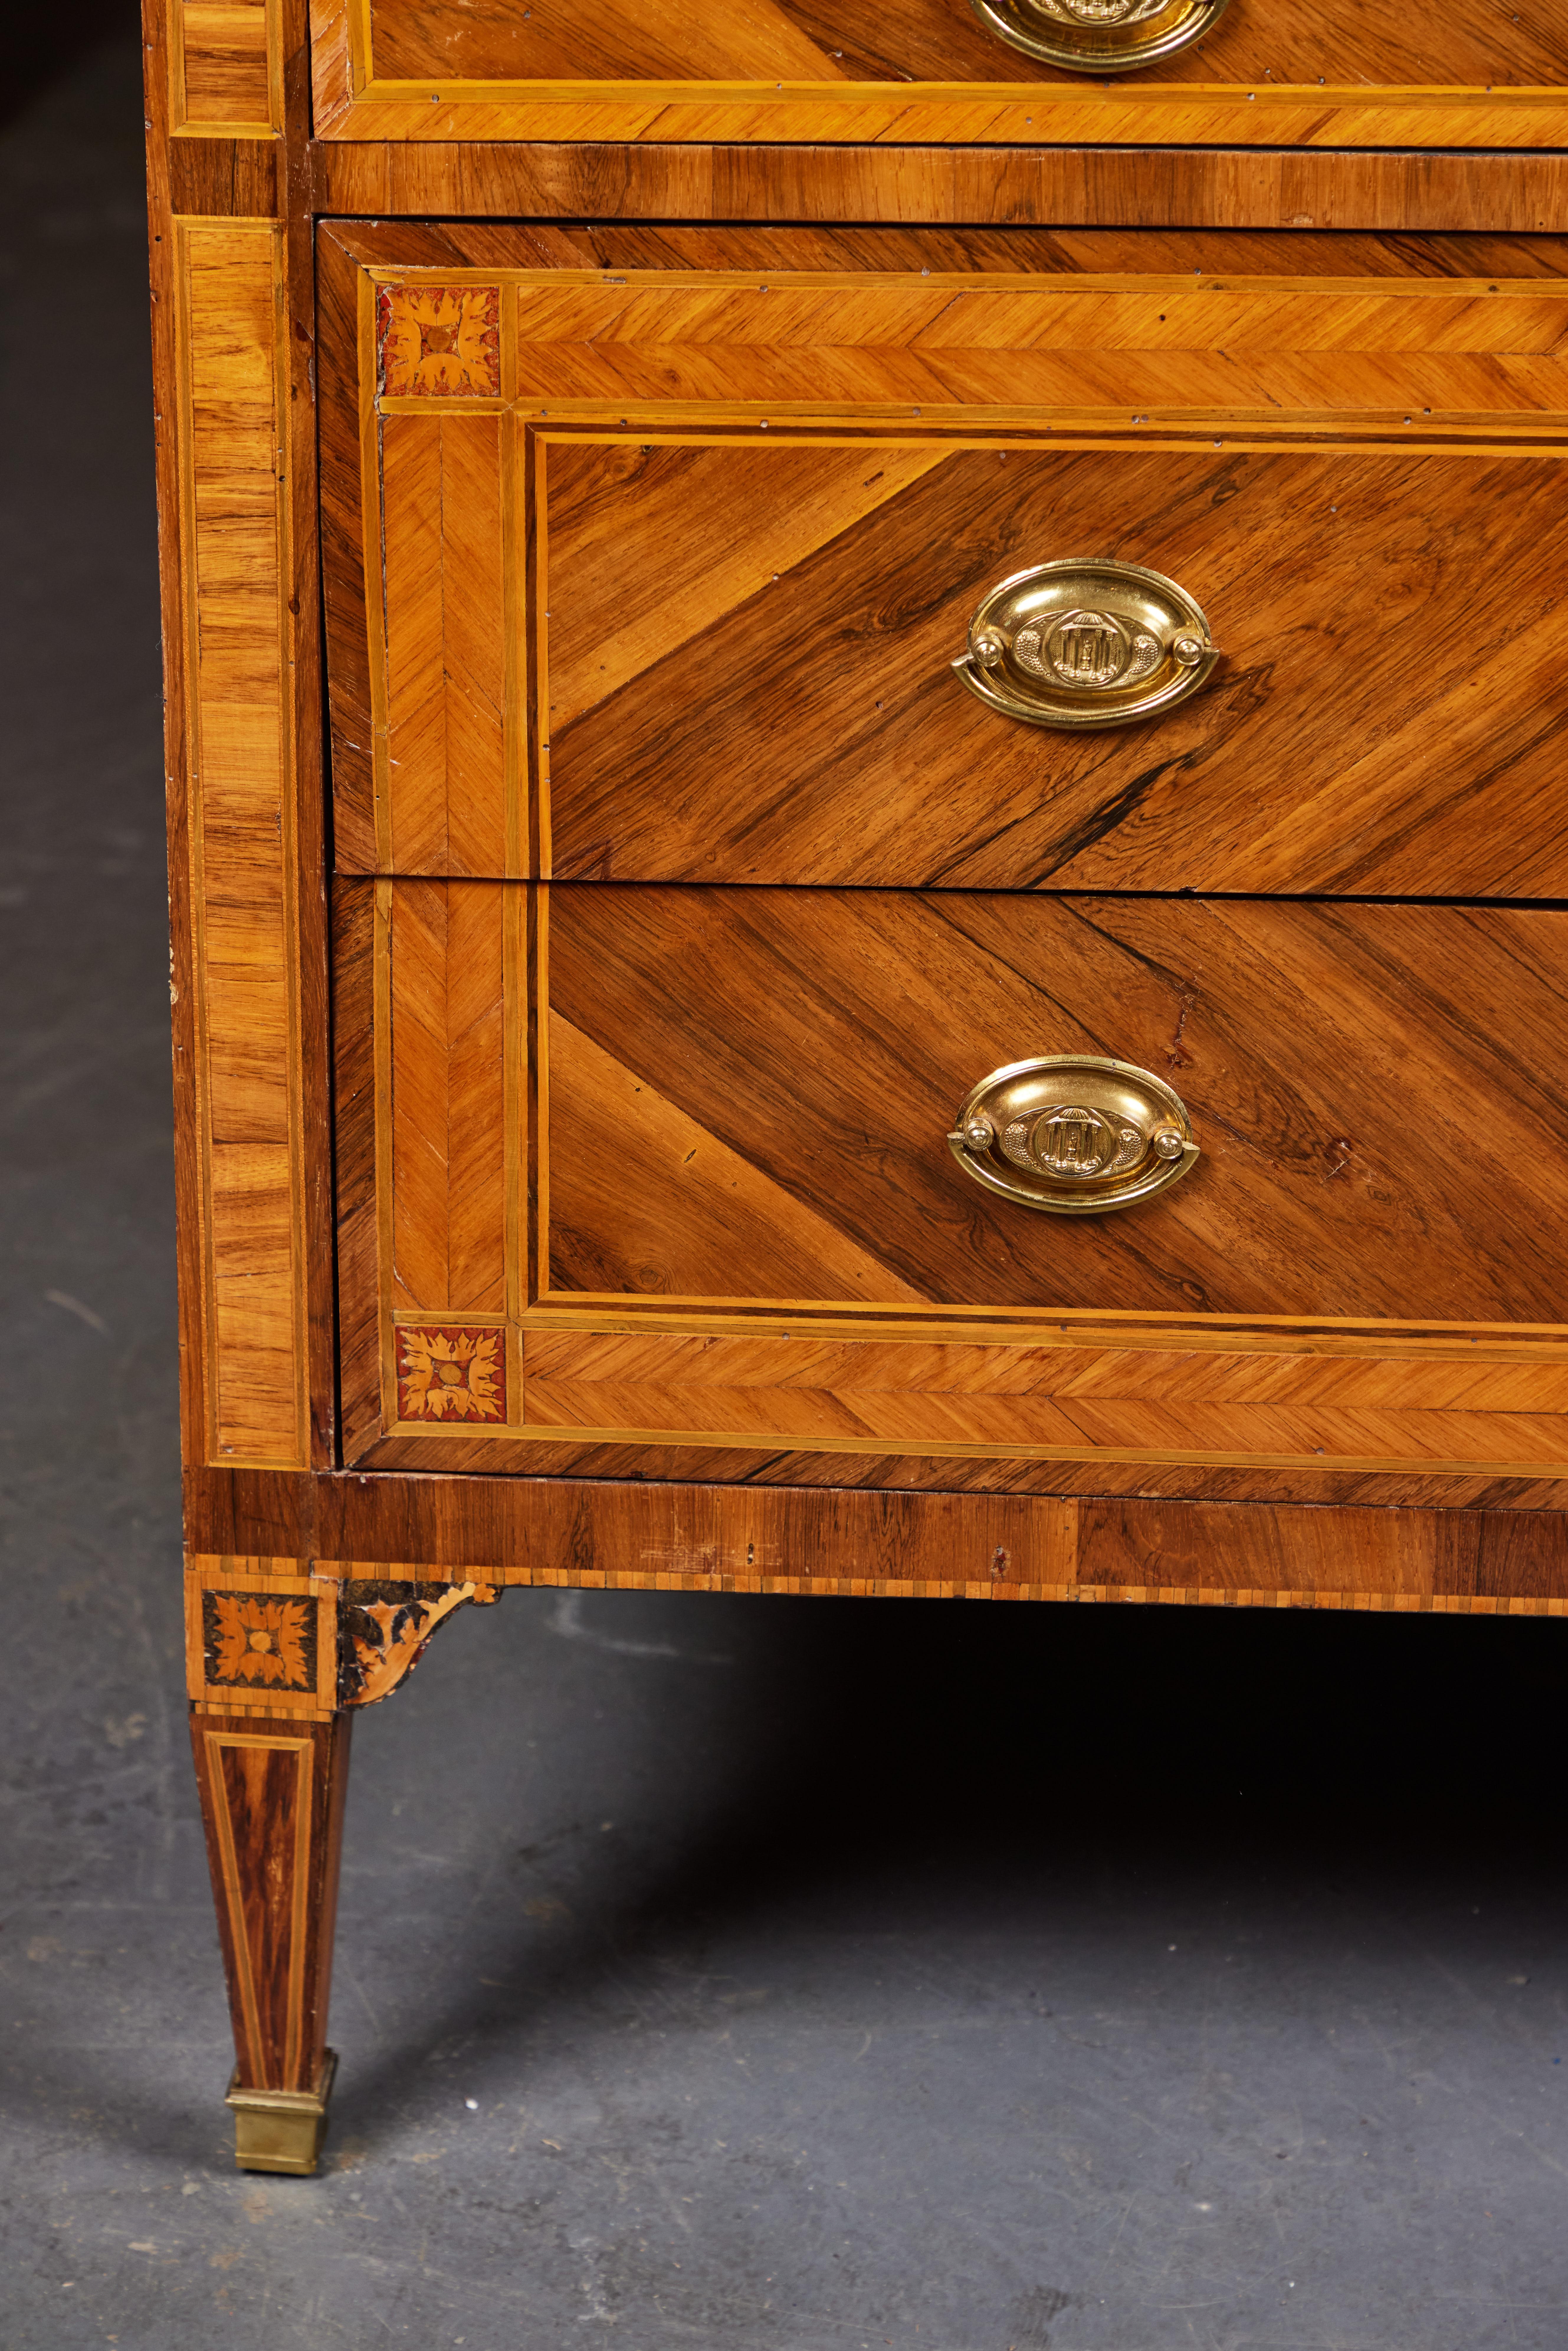 Beautifully finished, hand-carved, veneered and inlaid, two drawer, c. 1800 Northern Italian, Neoclassical commodes in book-matched walnut and fruitwood. The molded brass drawer pulls feature medallions with raised reliefs of columned, domed temples.